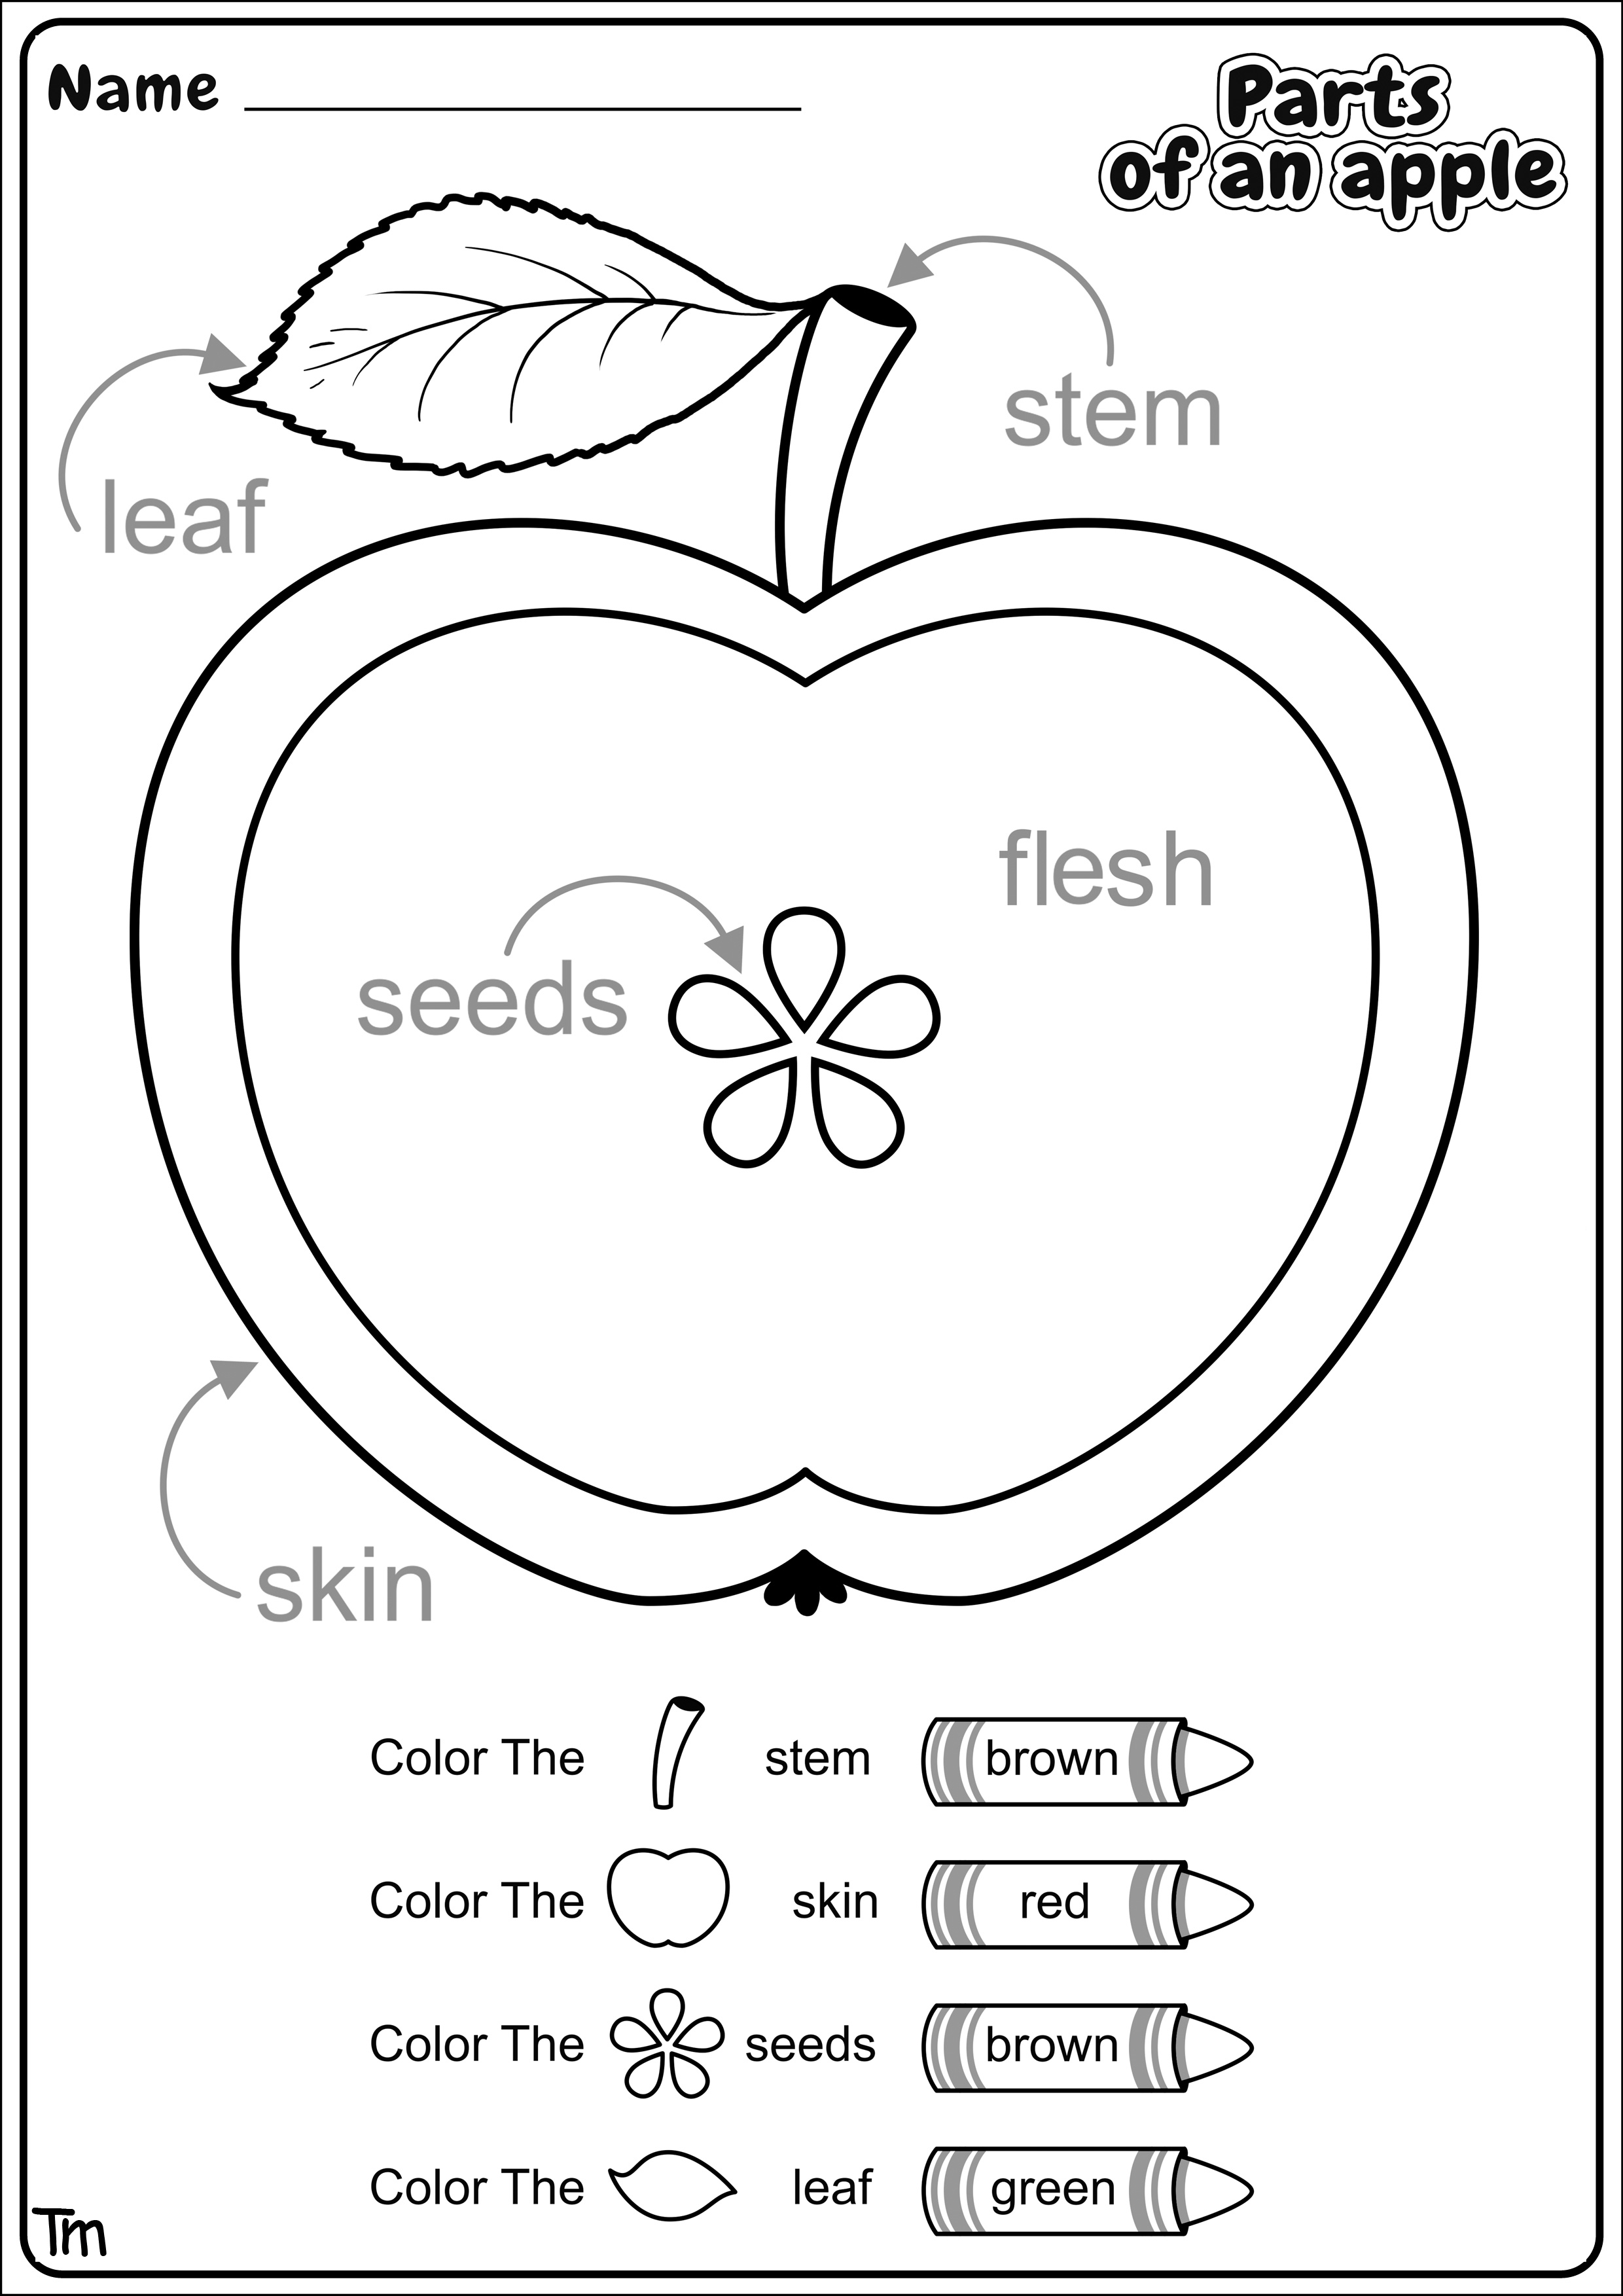 Apples & Where They Come From! Preschool Theme Worksheets